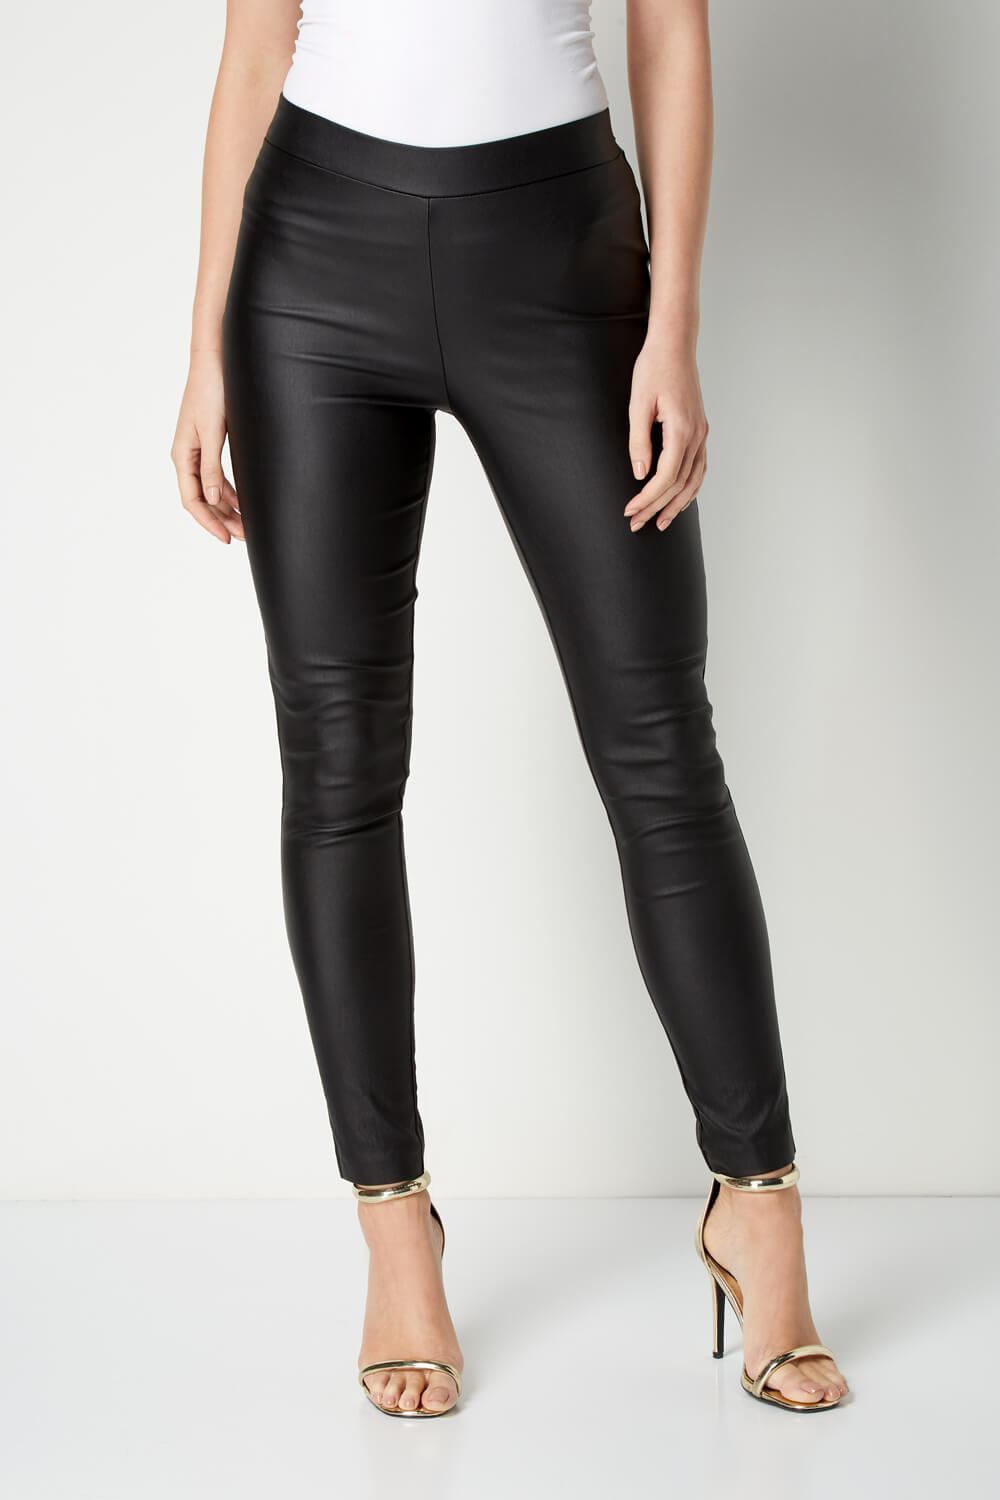 fake leather trousers women